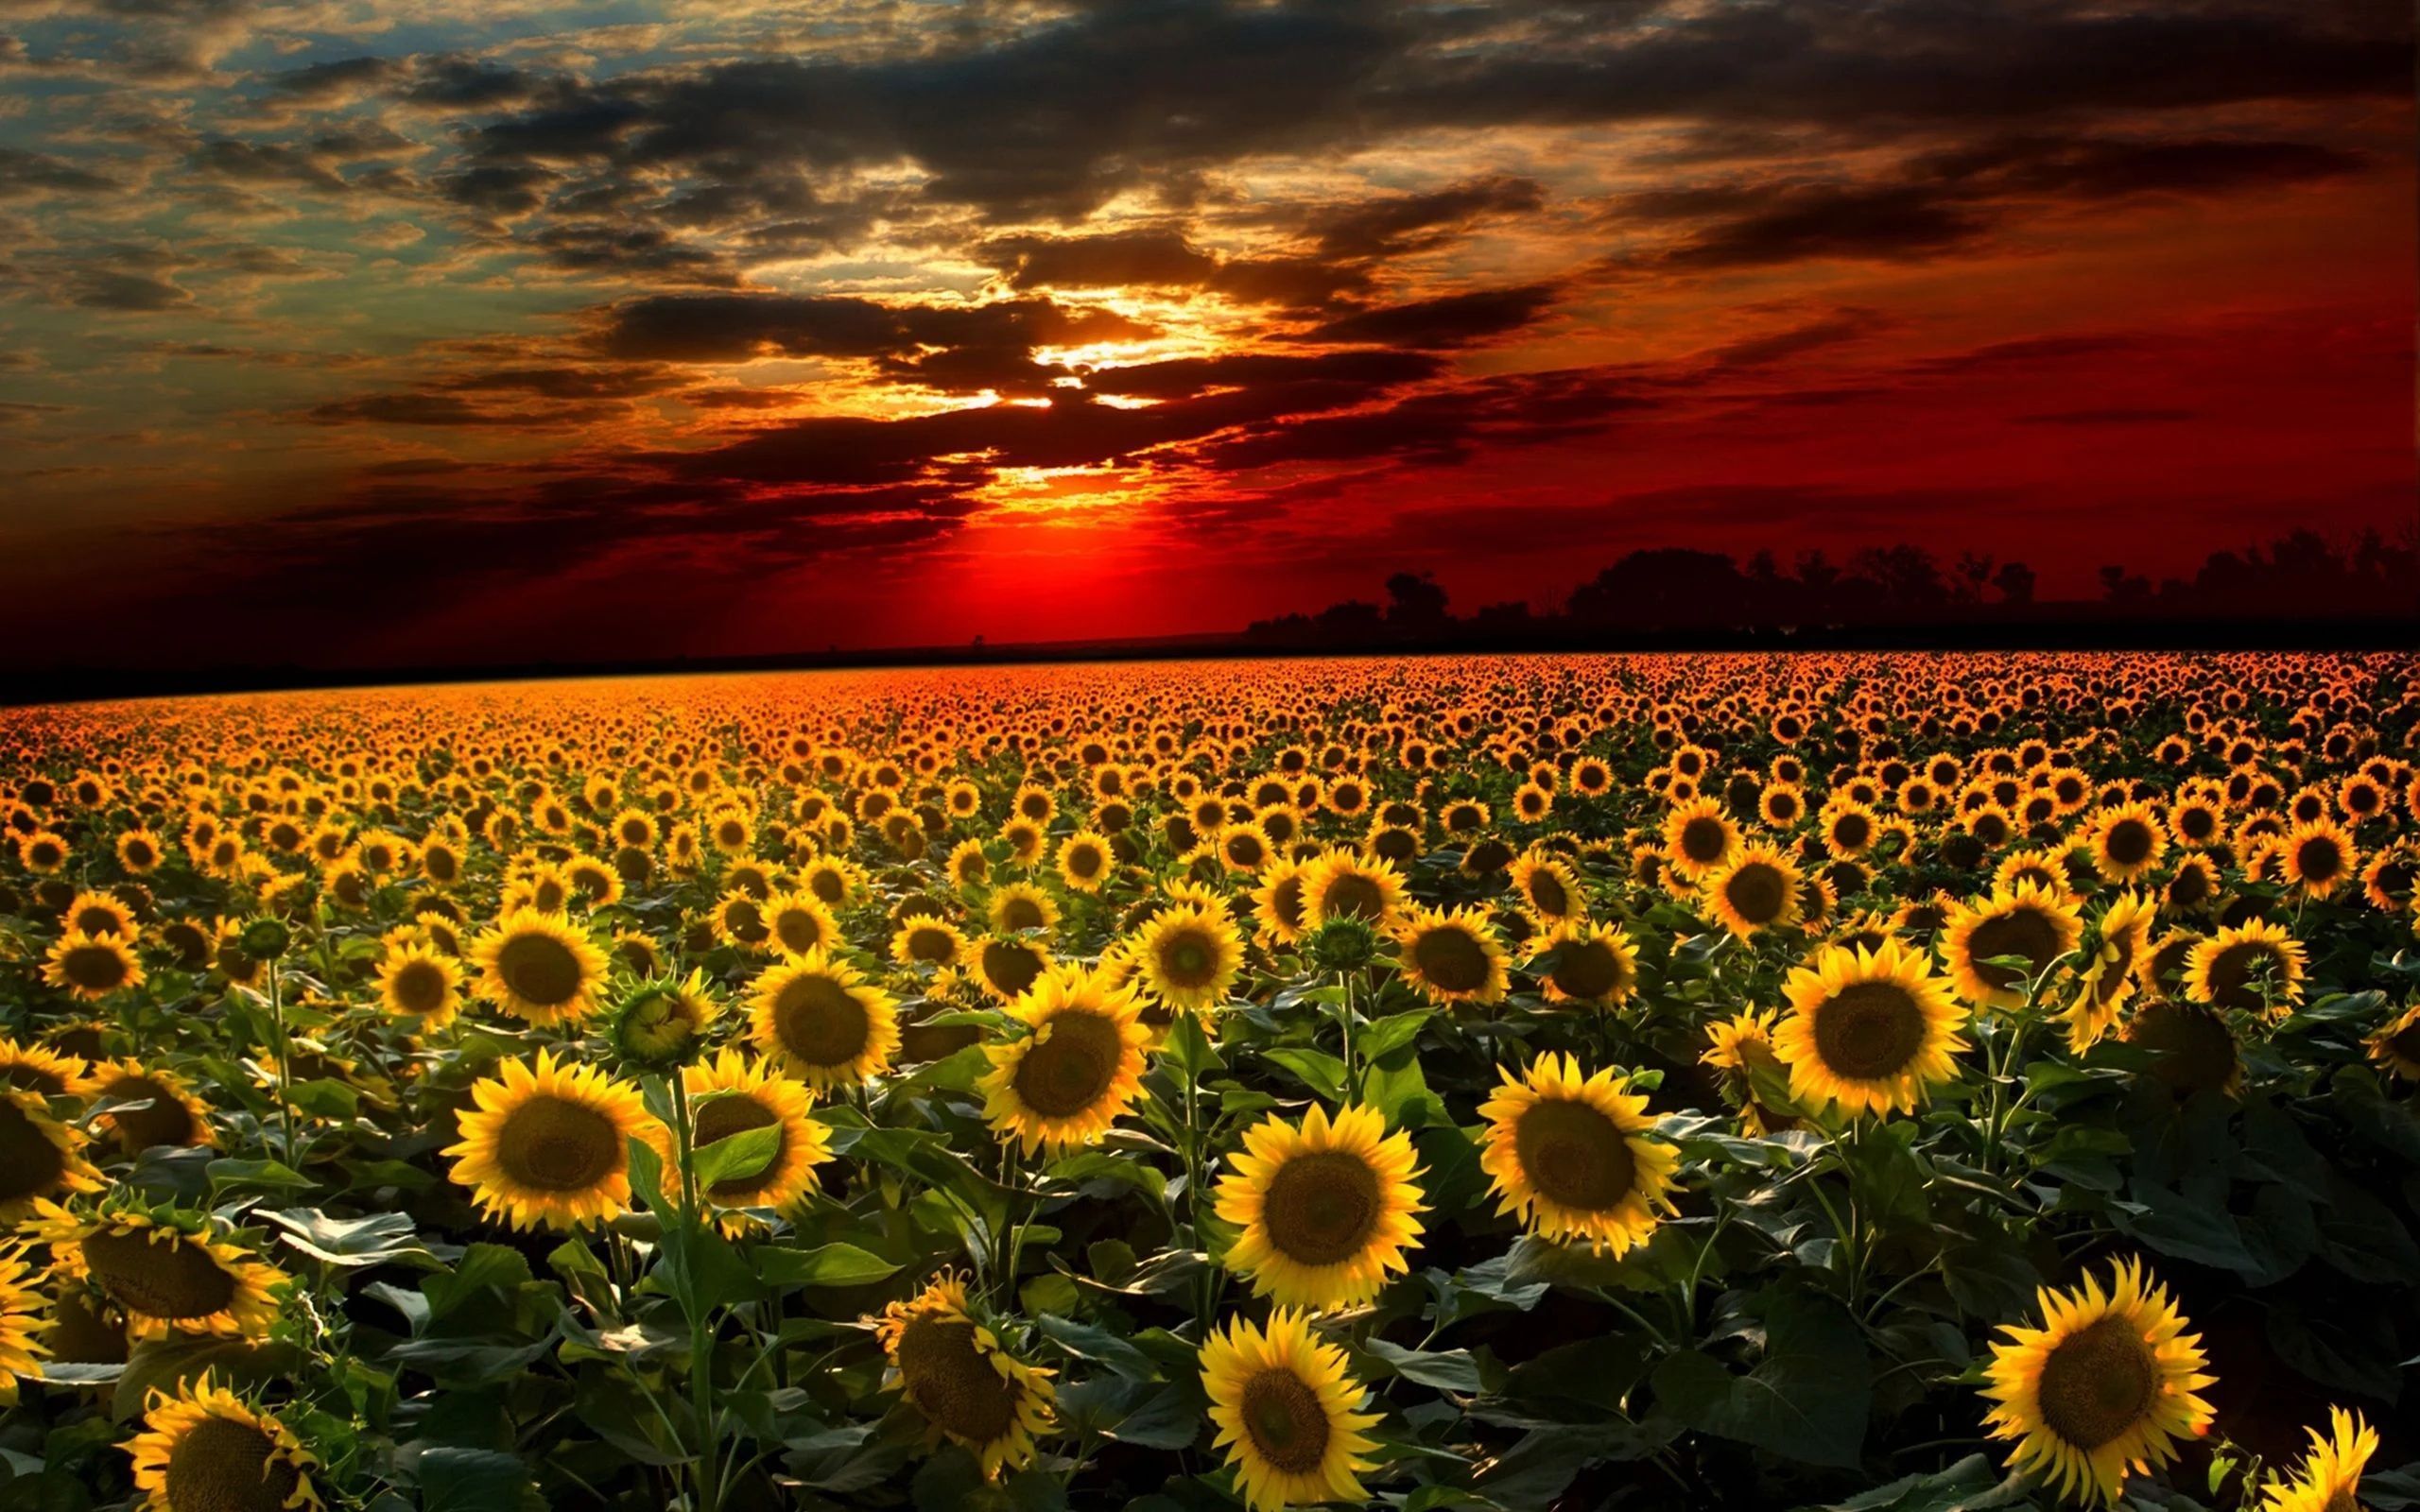 Sunflowers in a field during a sunset - Sunflower